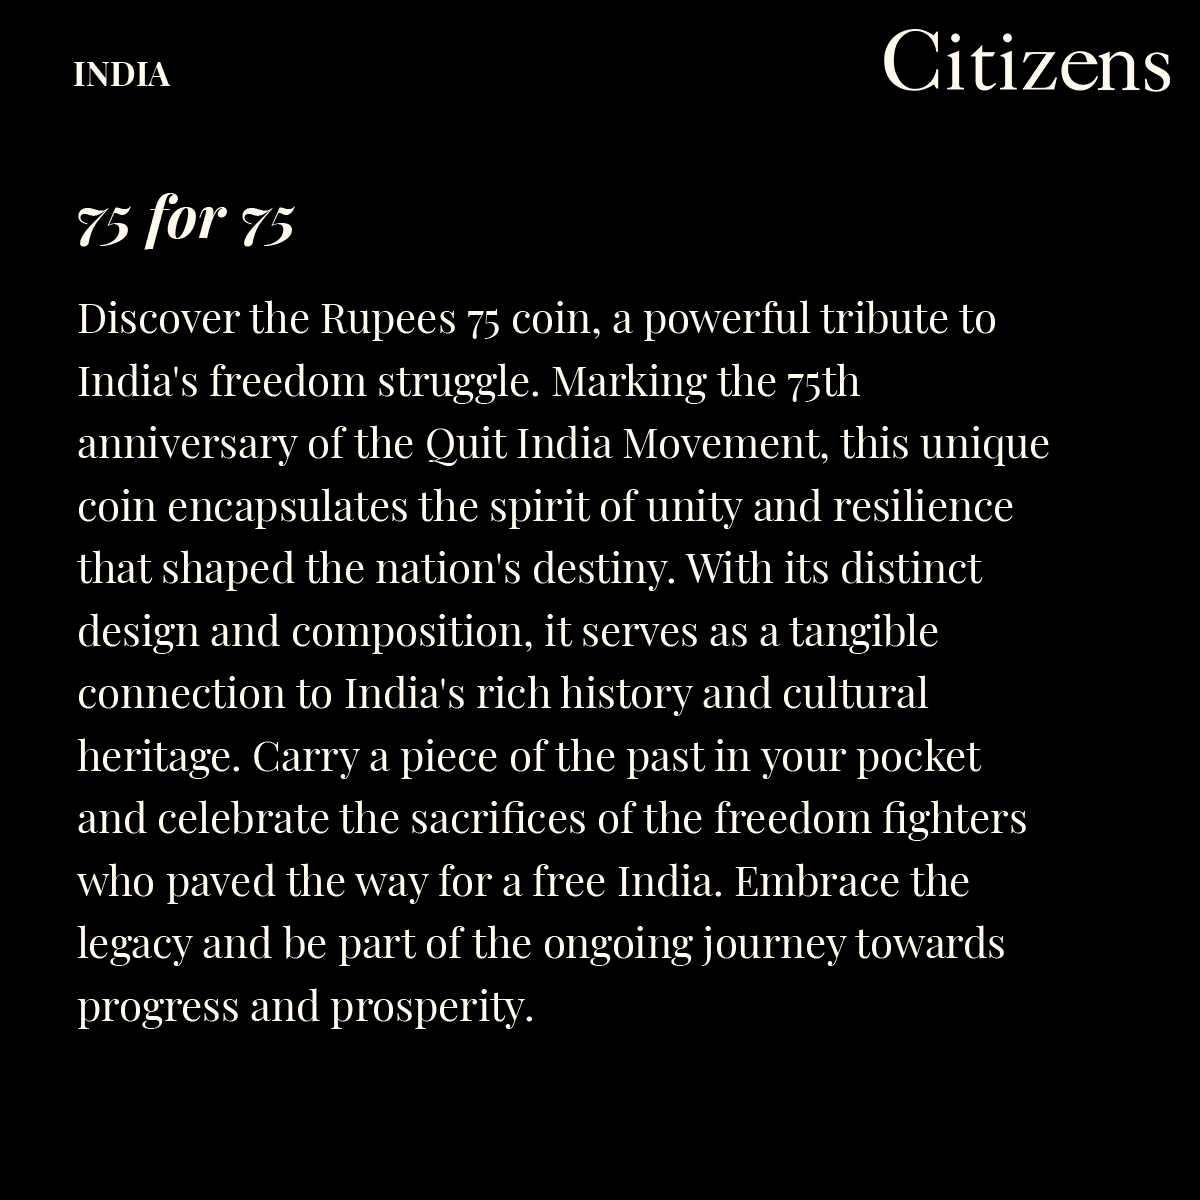 🪙 Commemorate India's freedom struggle with the Rupees 75 coin, honoring the Quit India Movement's 75th anniversary. Carry history in your pocket!  Read more at ctznsnews.blogspot.com/2023/05/75-for…  
🇮🇳 #Rupees75Coin #QuitIndiaMovement #IndianFreedomStruggle #PrideofIndia #Numismatics